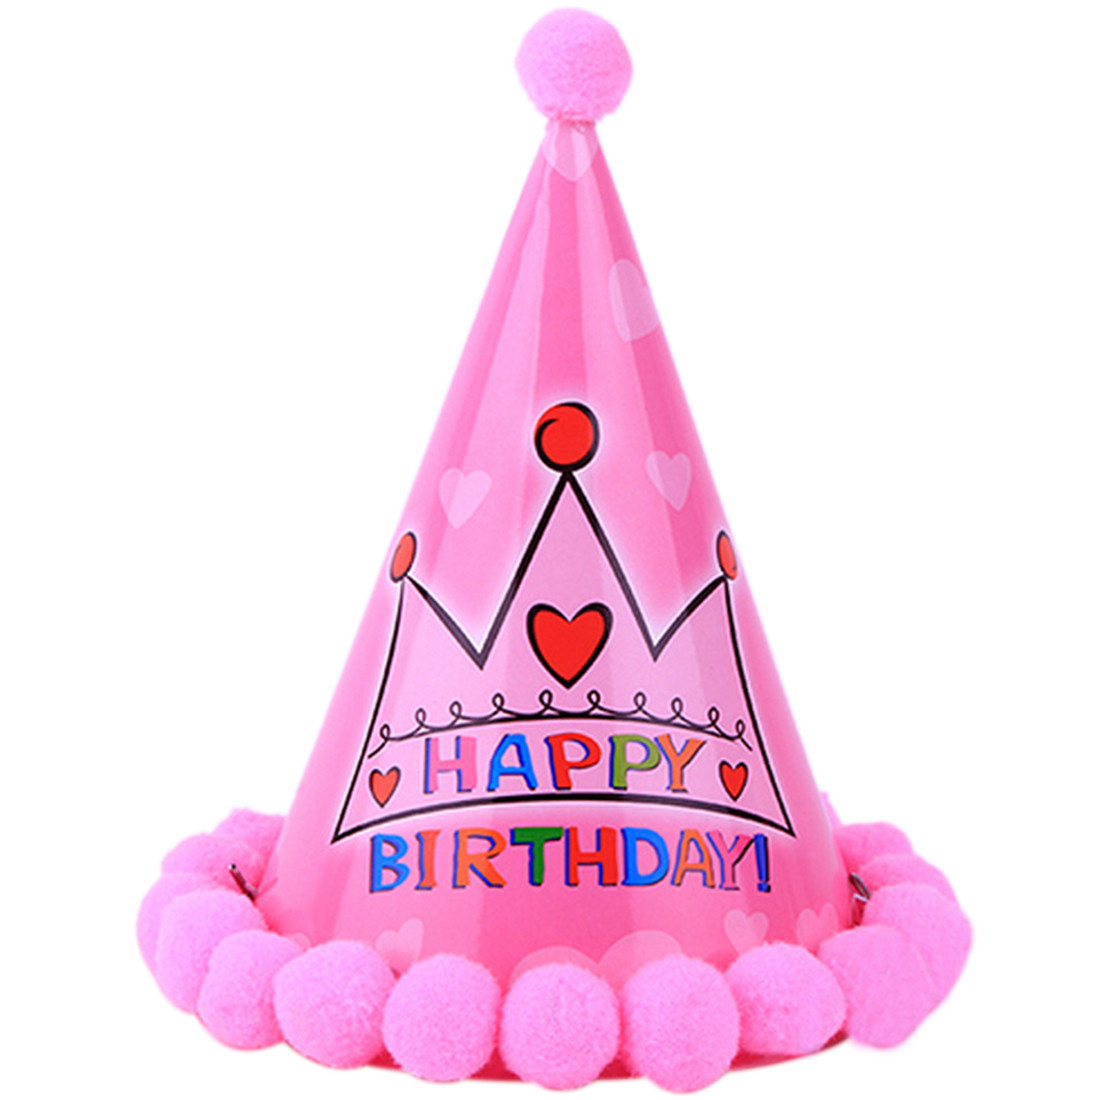 Birthday Party Hats
 Wholesale Paper Party Cone Hat Dress Up Girls Boys Favour